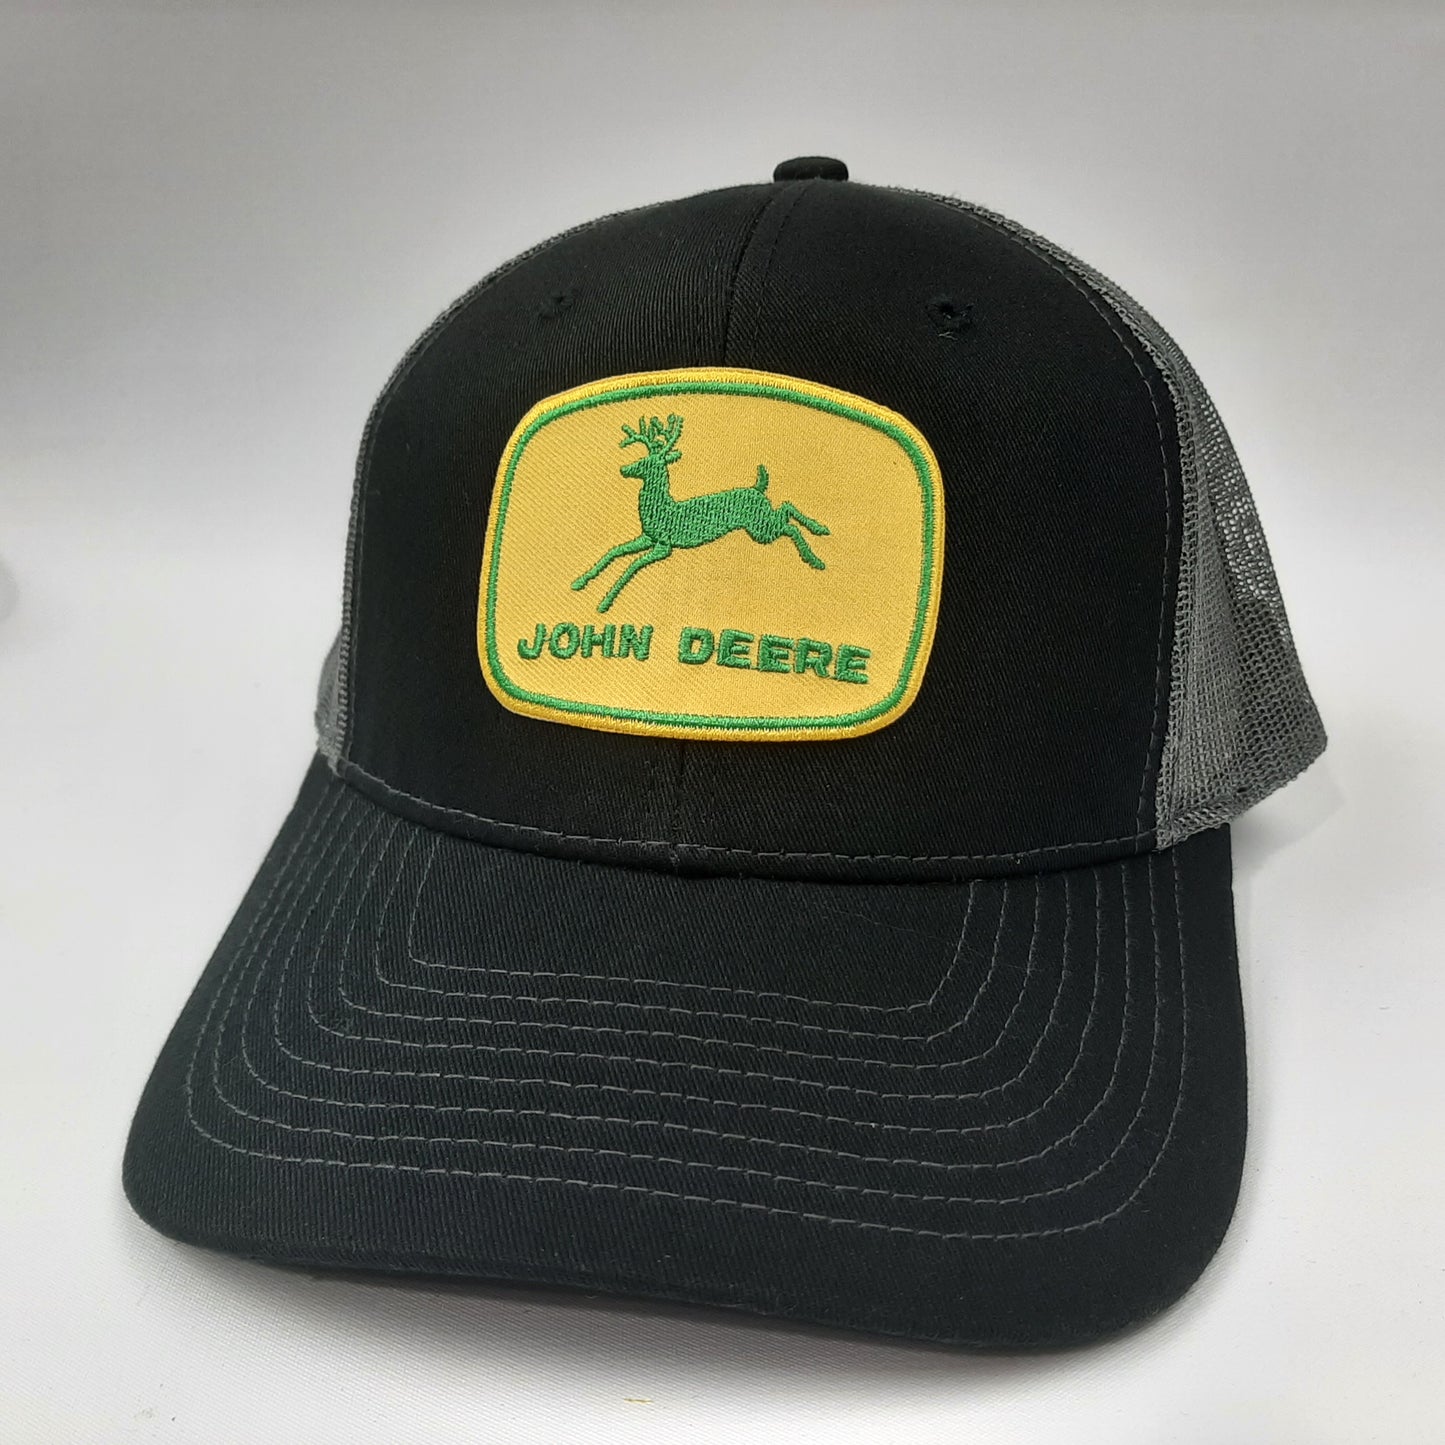 John Deere Embroidered Patch Curved Bill Mesh Snapback Cap Hat Black & Gray